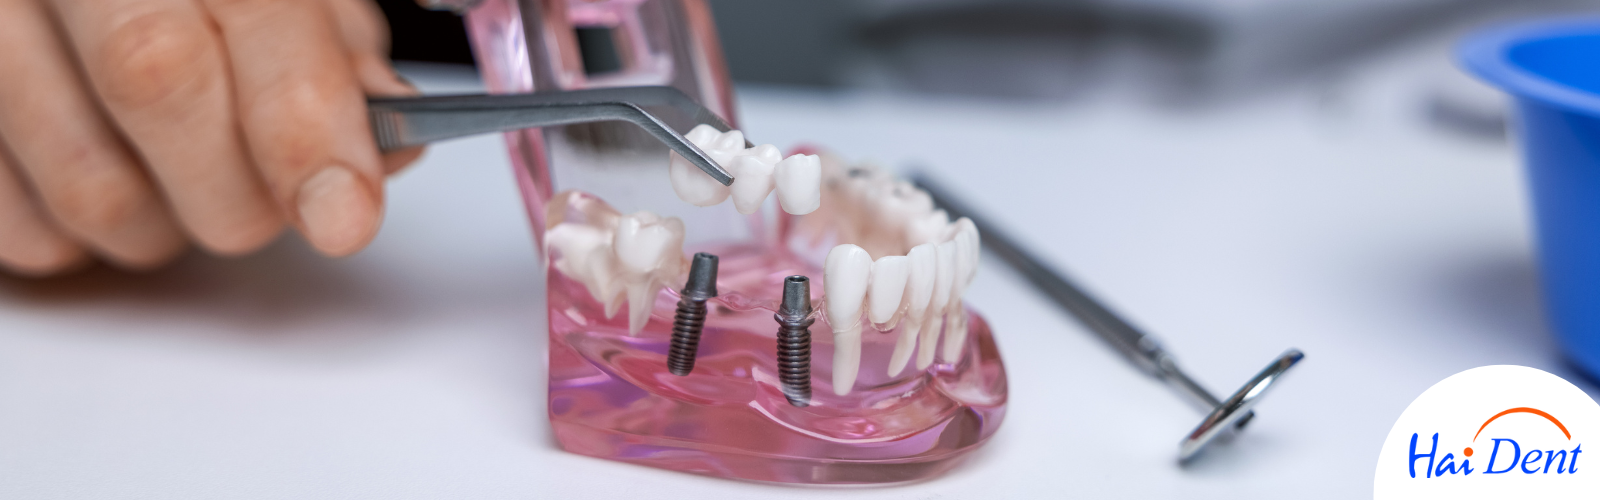 FULL MOUTH DENTAL IMPLANTS COST IN MUMBAI